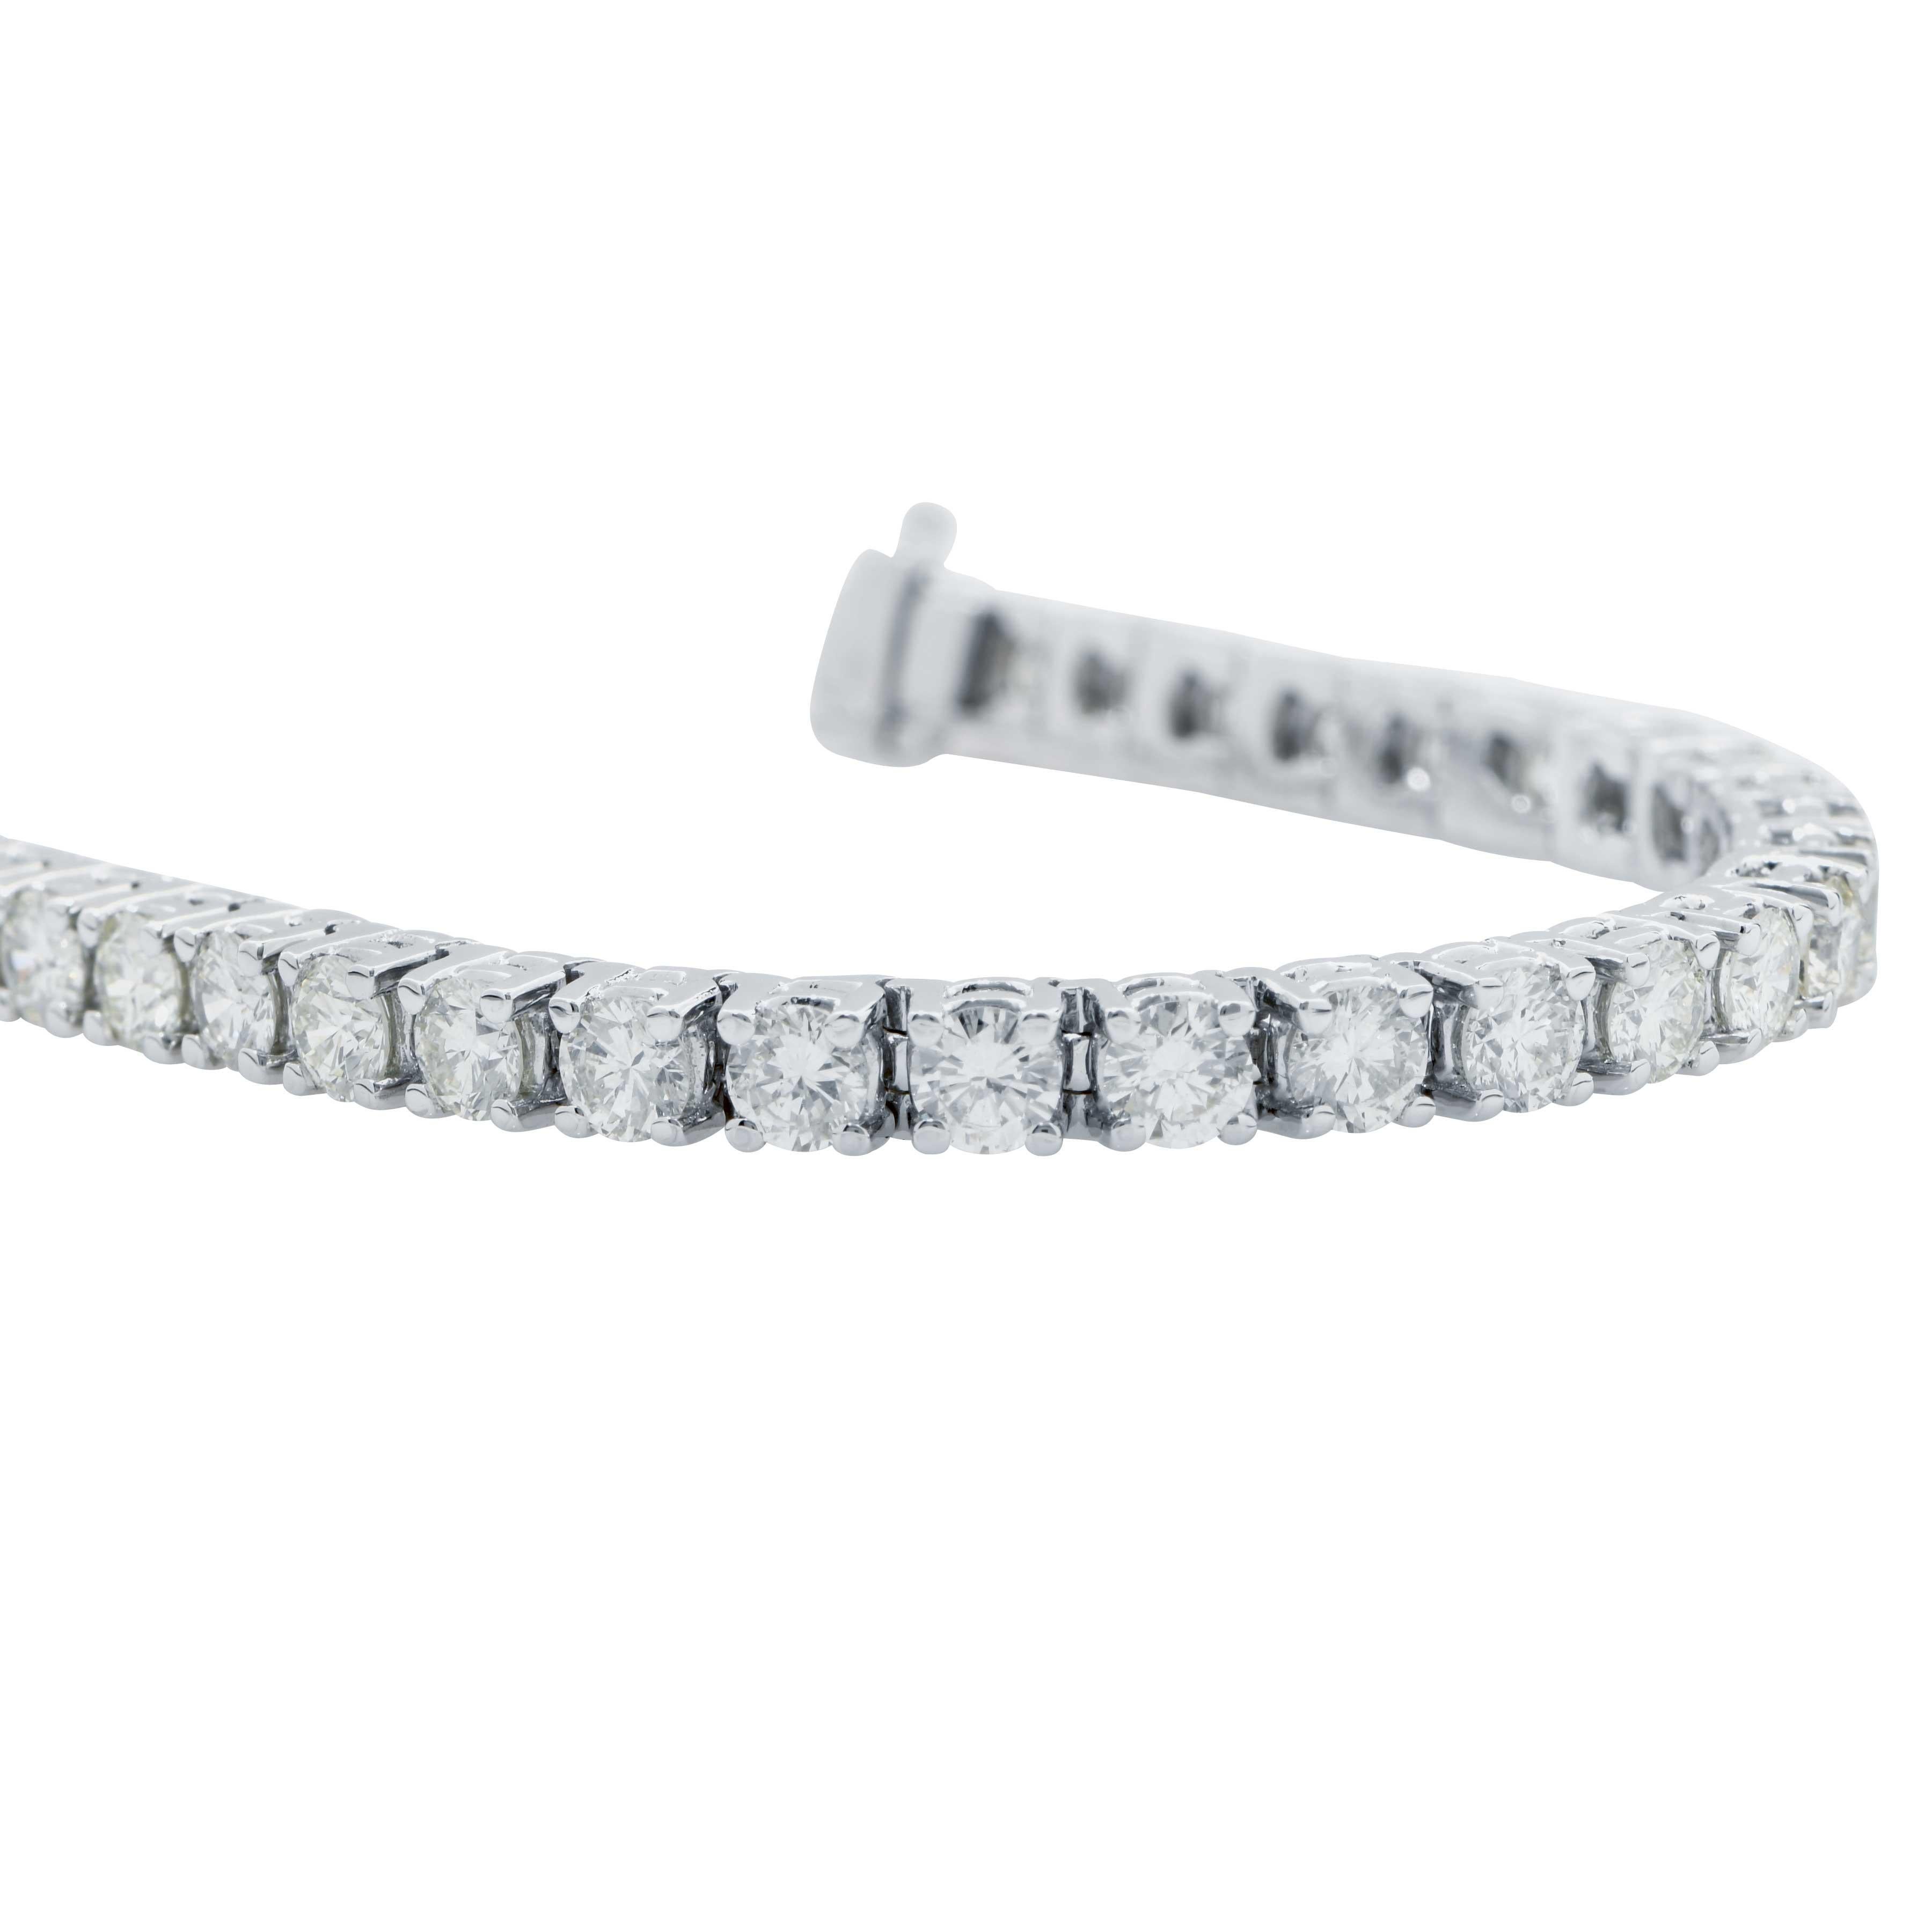 This beautiful diamond line tennis bracelet features 38 round brilliant cut diamonds averaging I in color Vs2 in clarity. The diamonds are expertly set with four prongs in an 18 Karat White Gold bracelet.
Bracelet length: 7 inches
Bracelet weight: